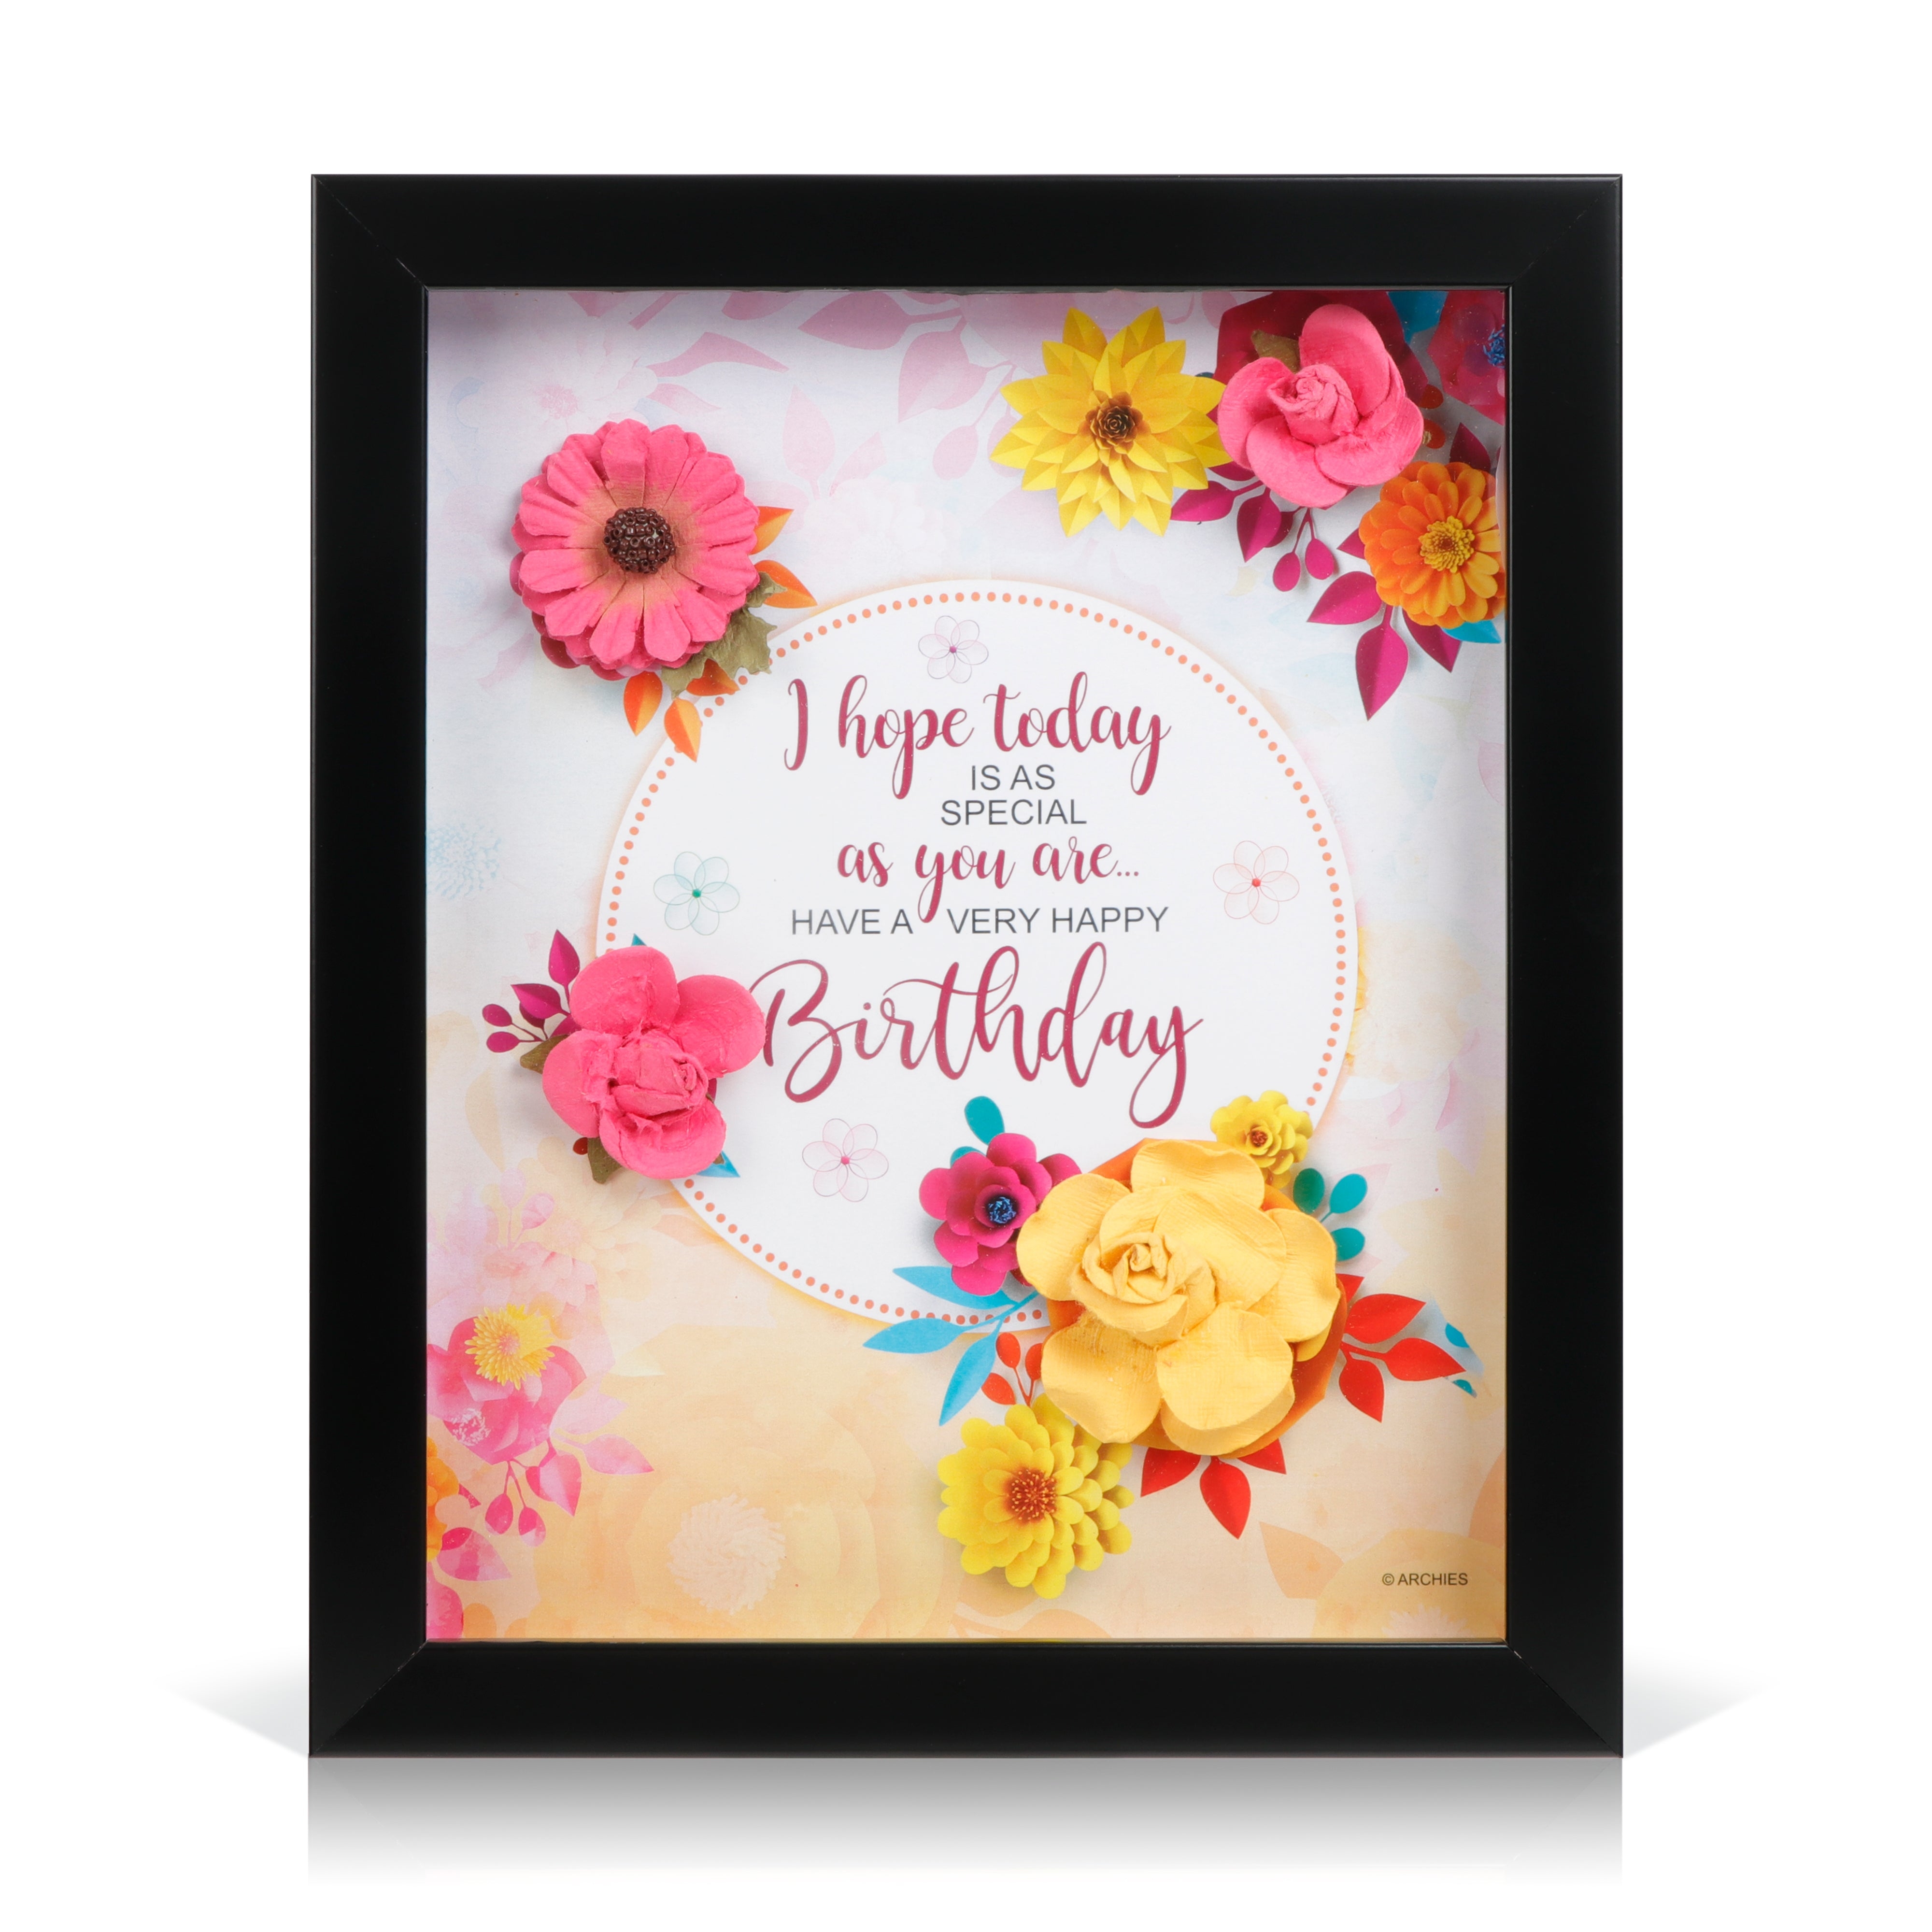 Archies KEEPSAKE QUOTATION - I HOPE TODAY IS AS ..... For gifting and Home décor